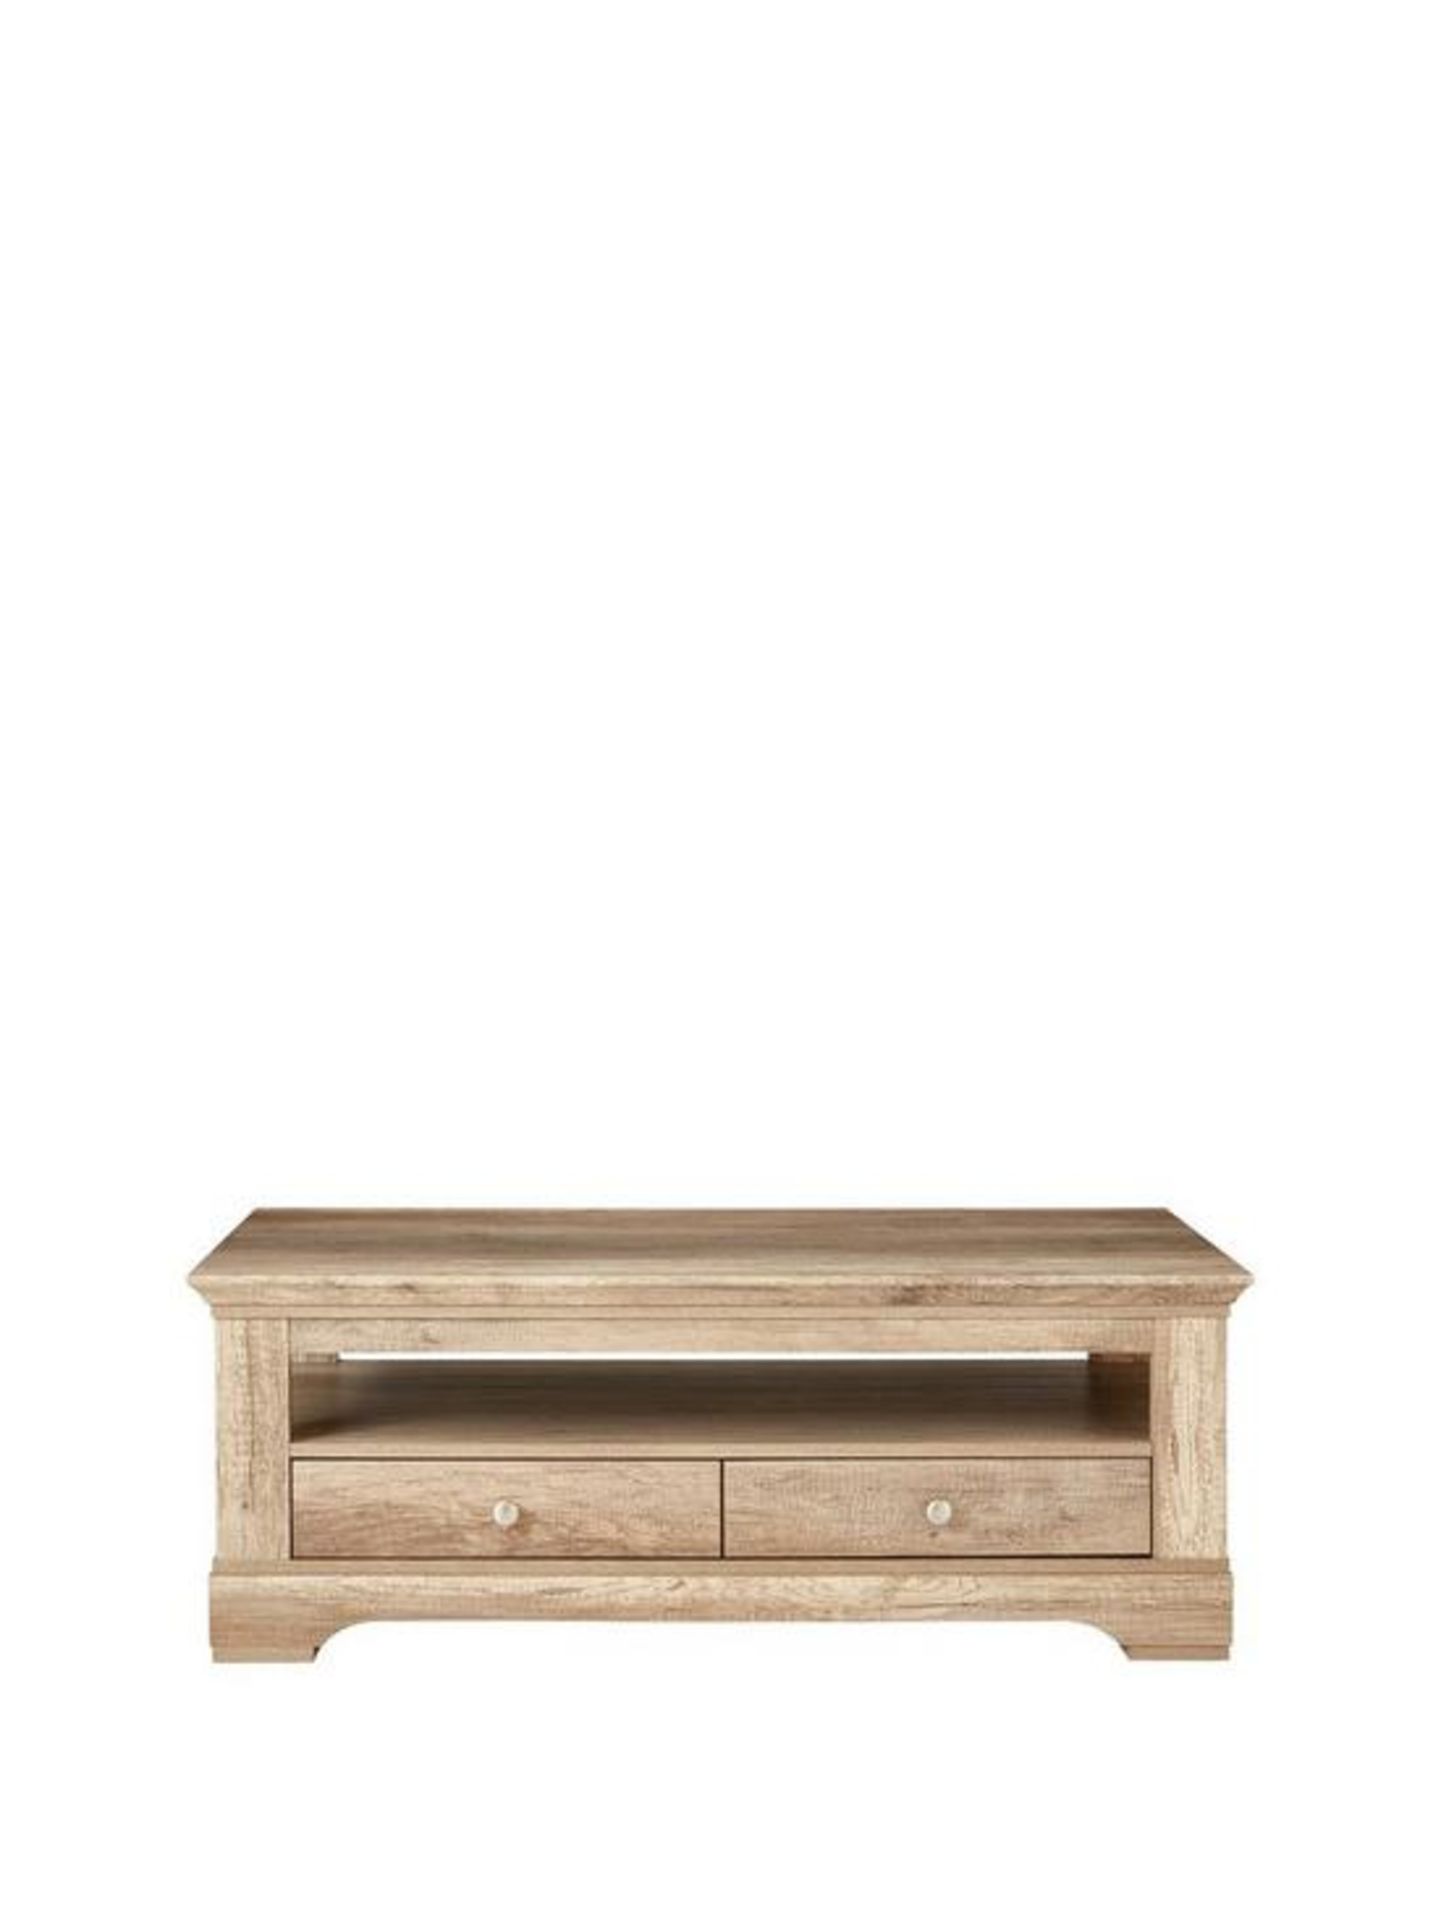 Boxed Item Ideal Home Wiltshire 2 Drawers Coffee Table [Oak] 44X115X57Cm Rrp:£250.0